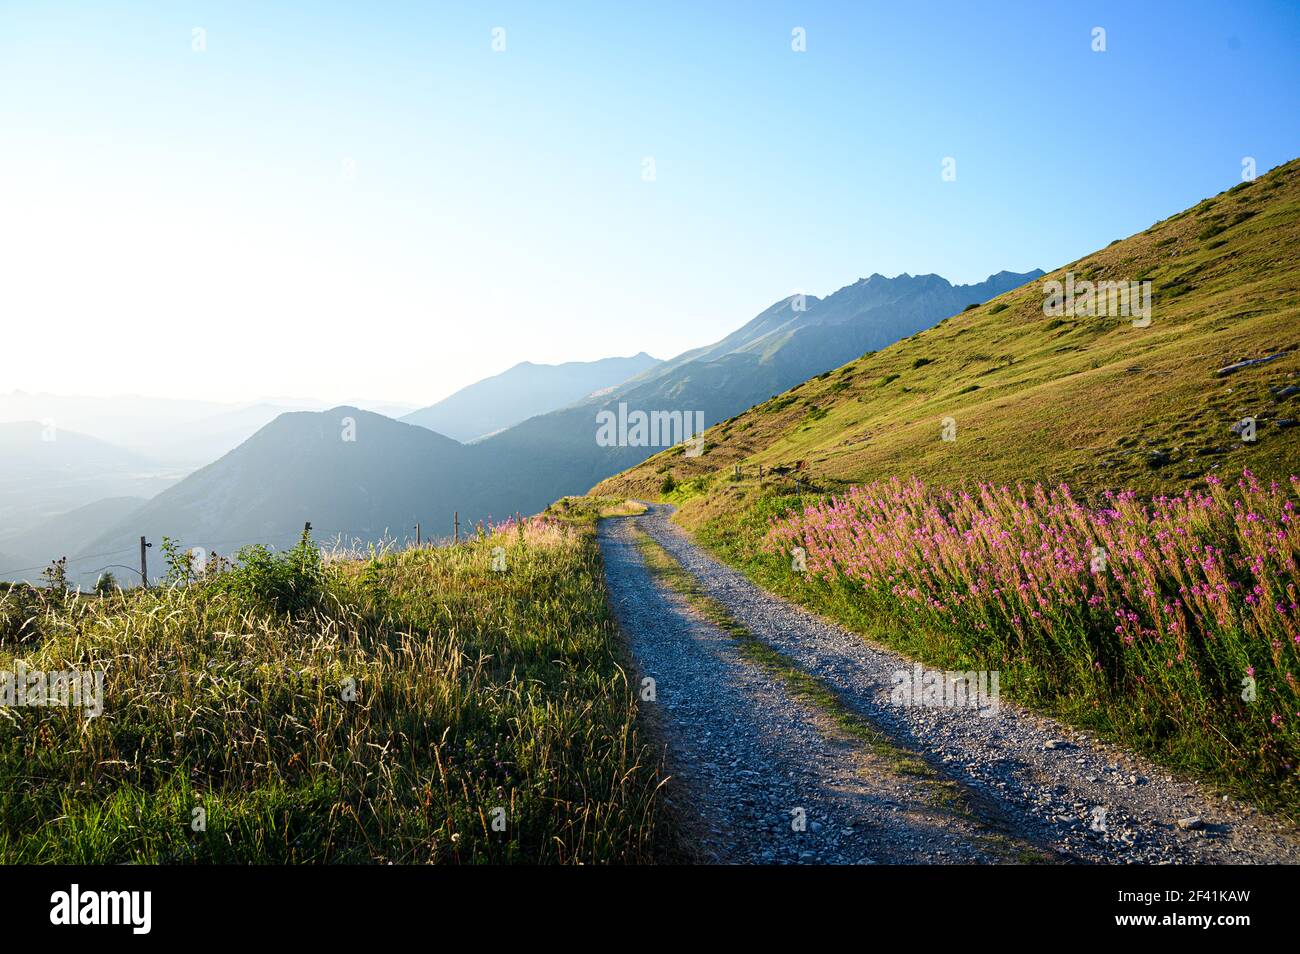 Macadam stone path in the mountains surrounded by beautiful flowers and grassy hills Stock Photo